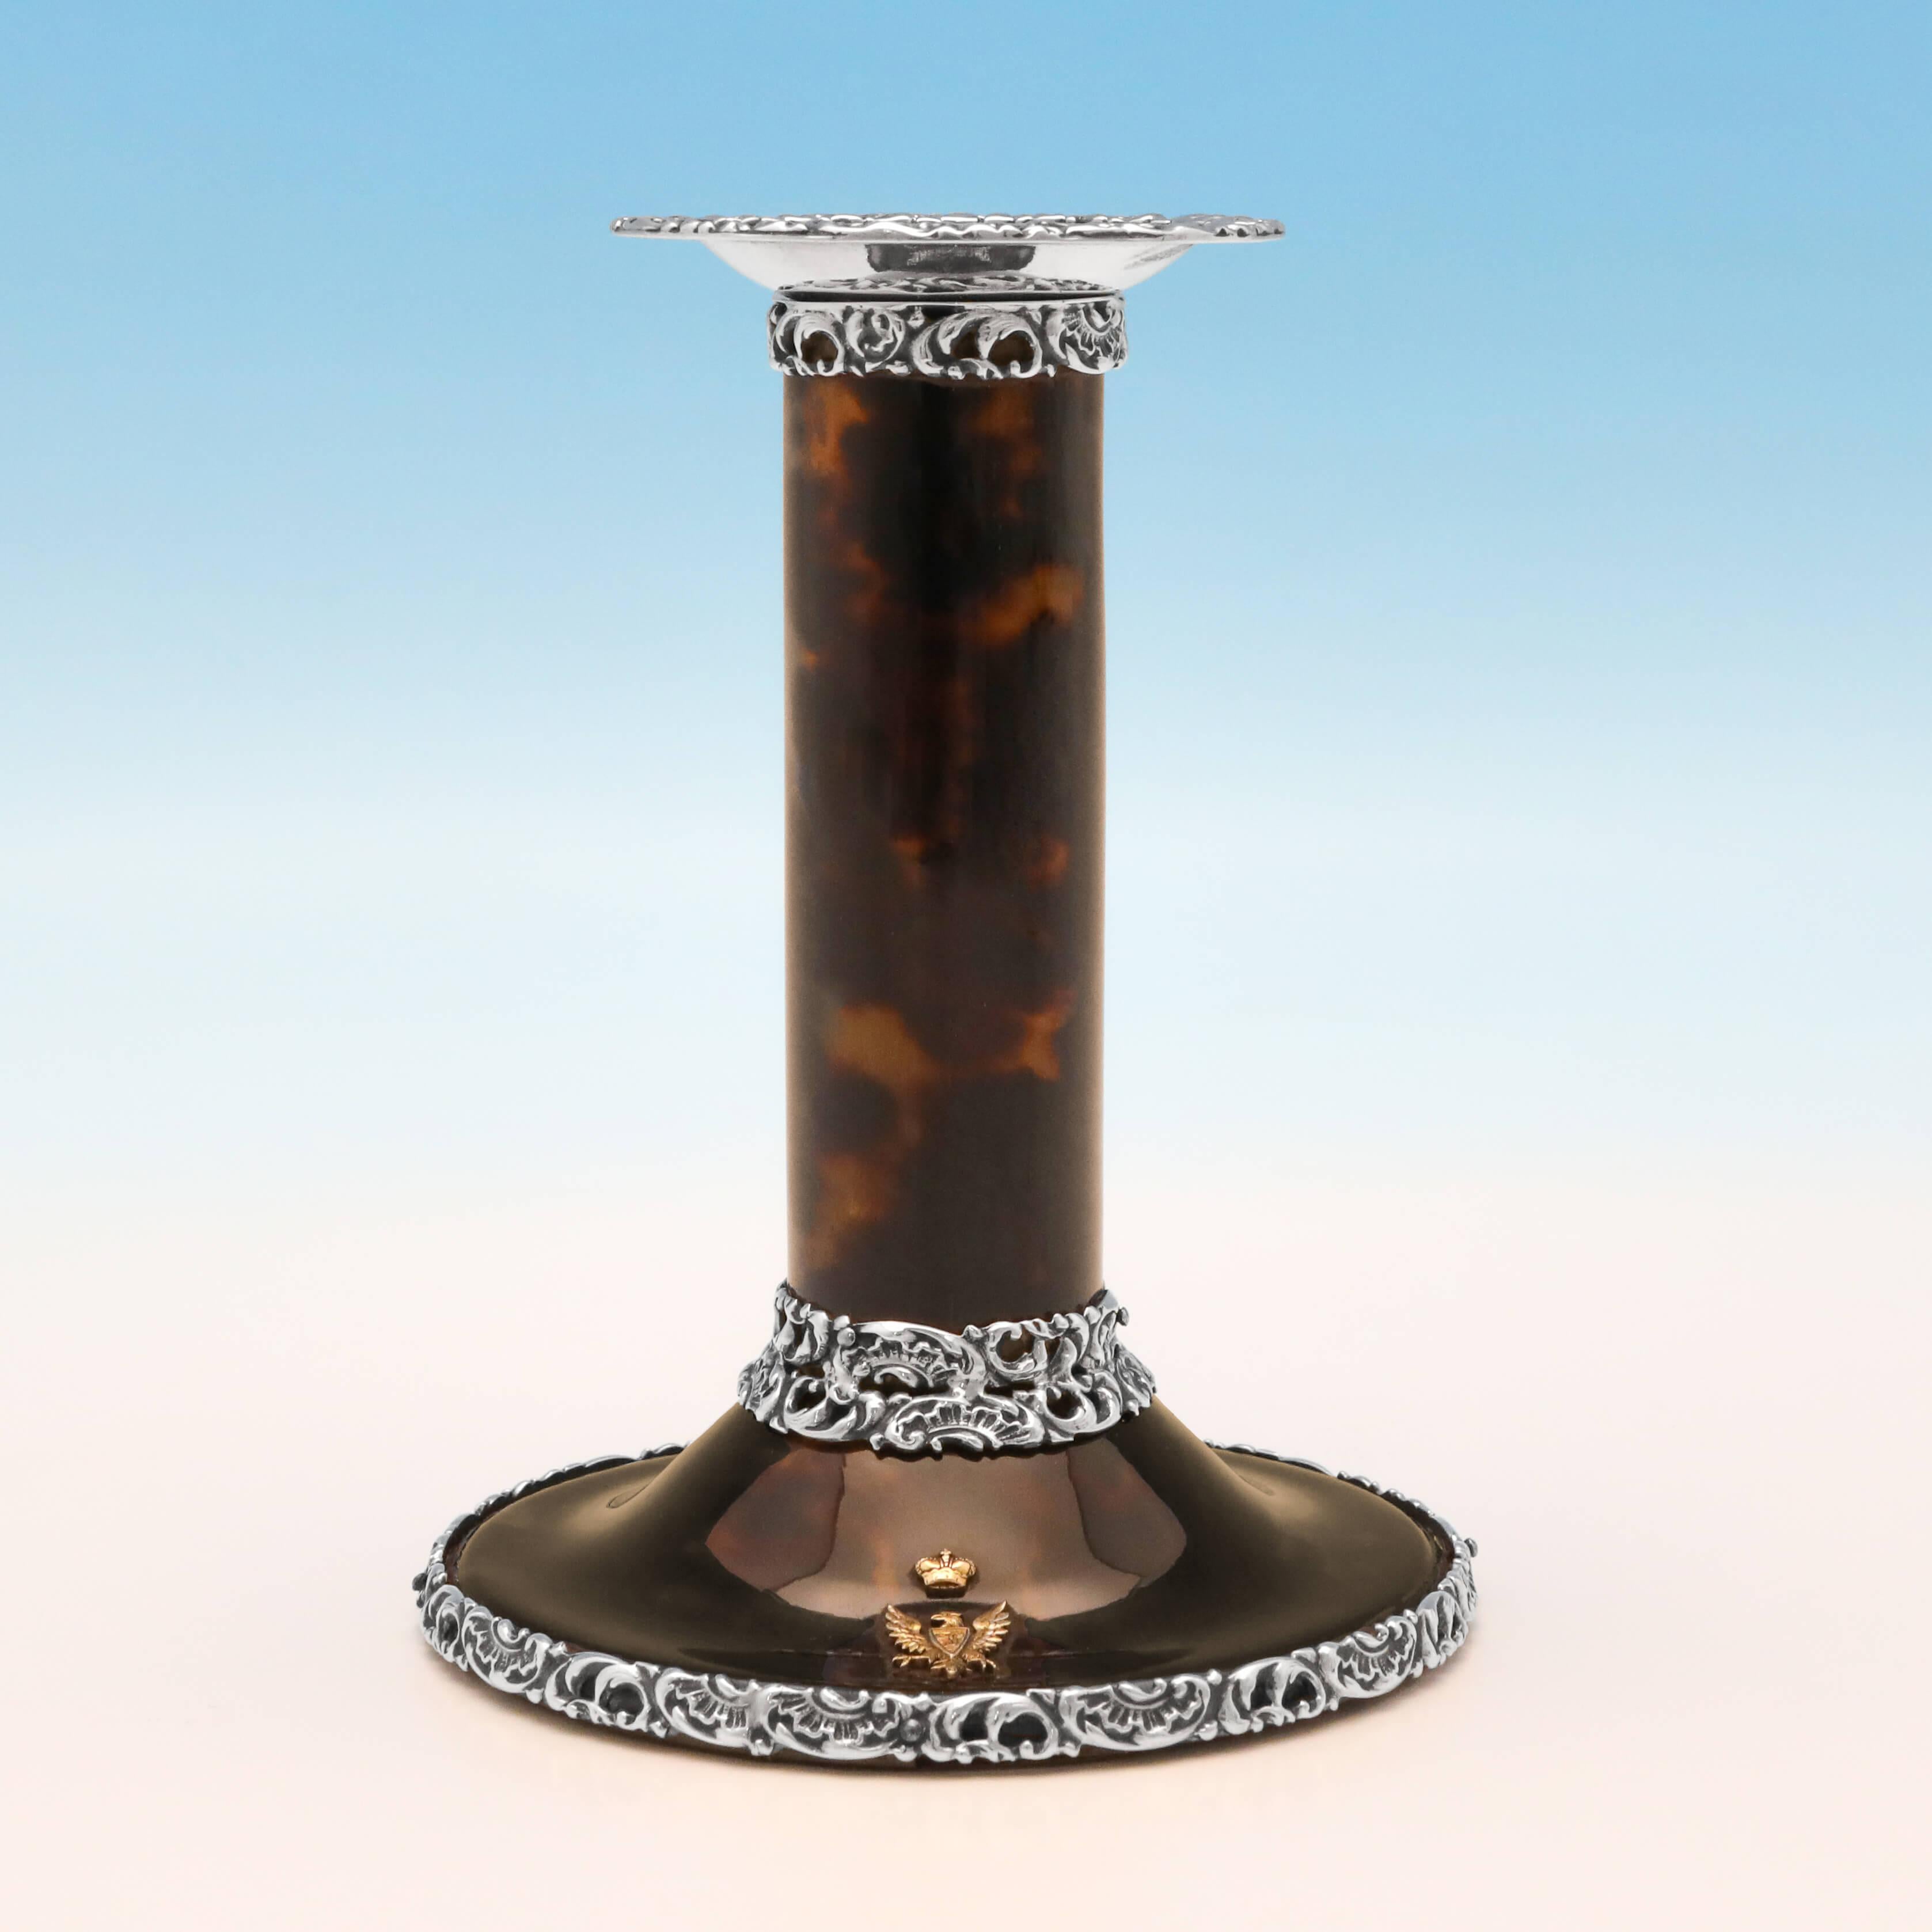 Hallmarked in London in 1898 by John Batson & Sons, this wonderful pair of Victorian, antique sterling silver candlesticks, are made of tortoiseshell, with elaborate silver mounts and an applied gold crest to each. Each candlestick measures